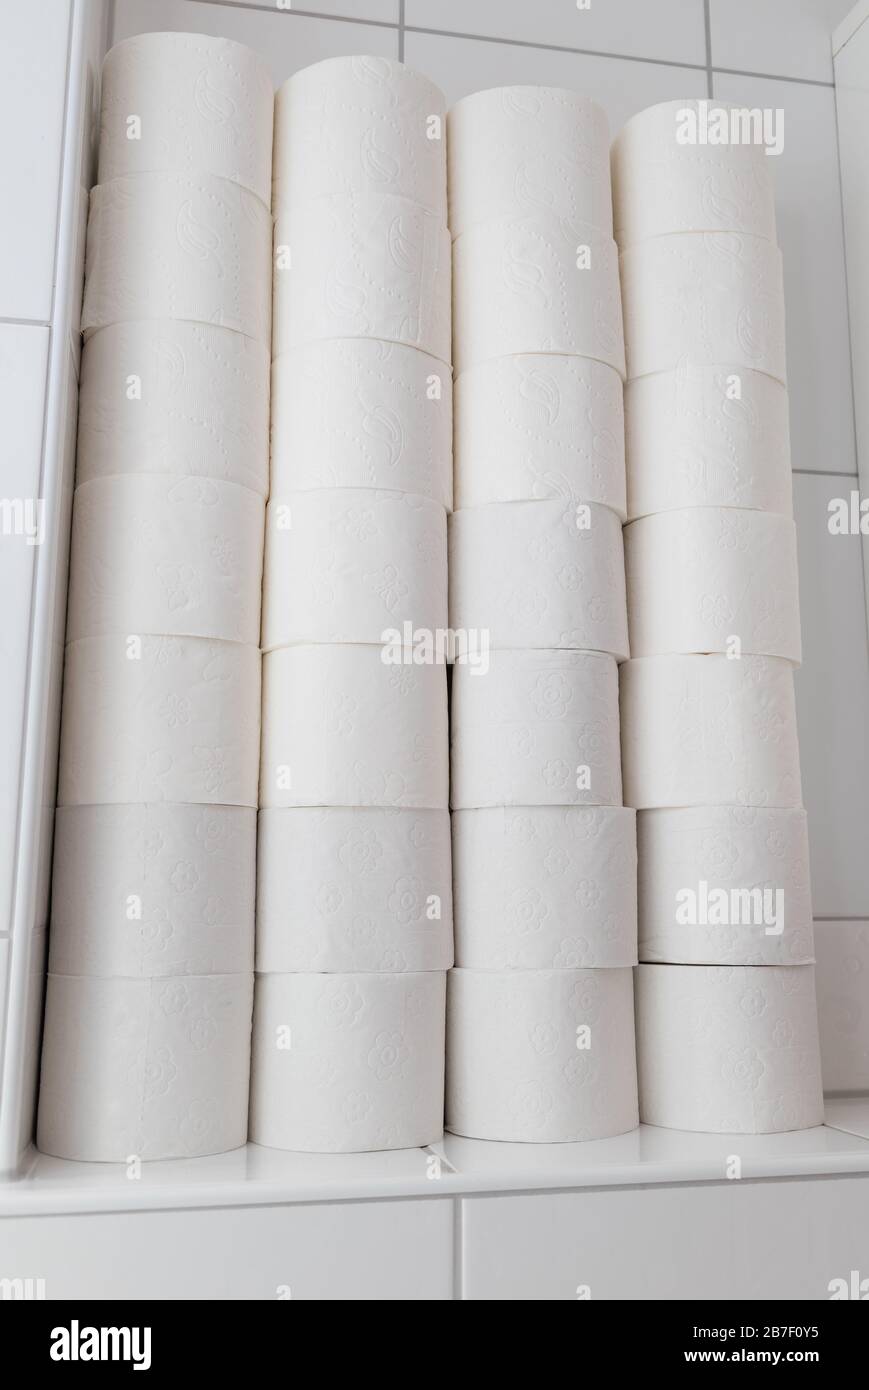 Closeup of white rolls of toilet paper in a bathroom Stock Photo